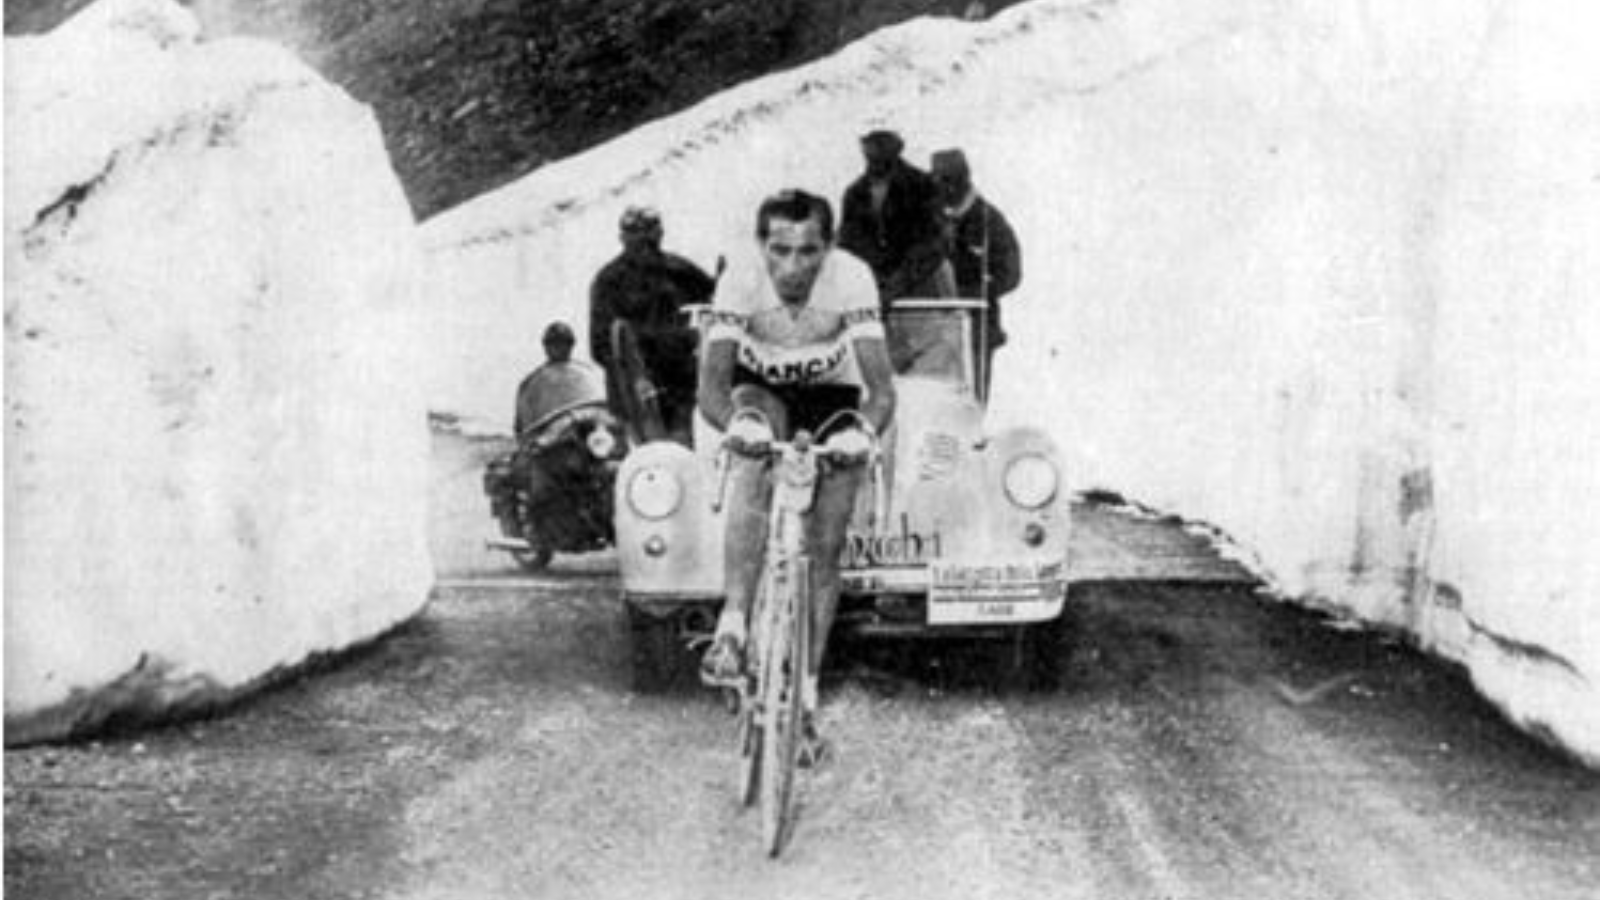 Italian cycling legend Fausto Coppi riding between two big snow walls on Stelvio in 1952